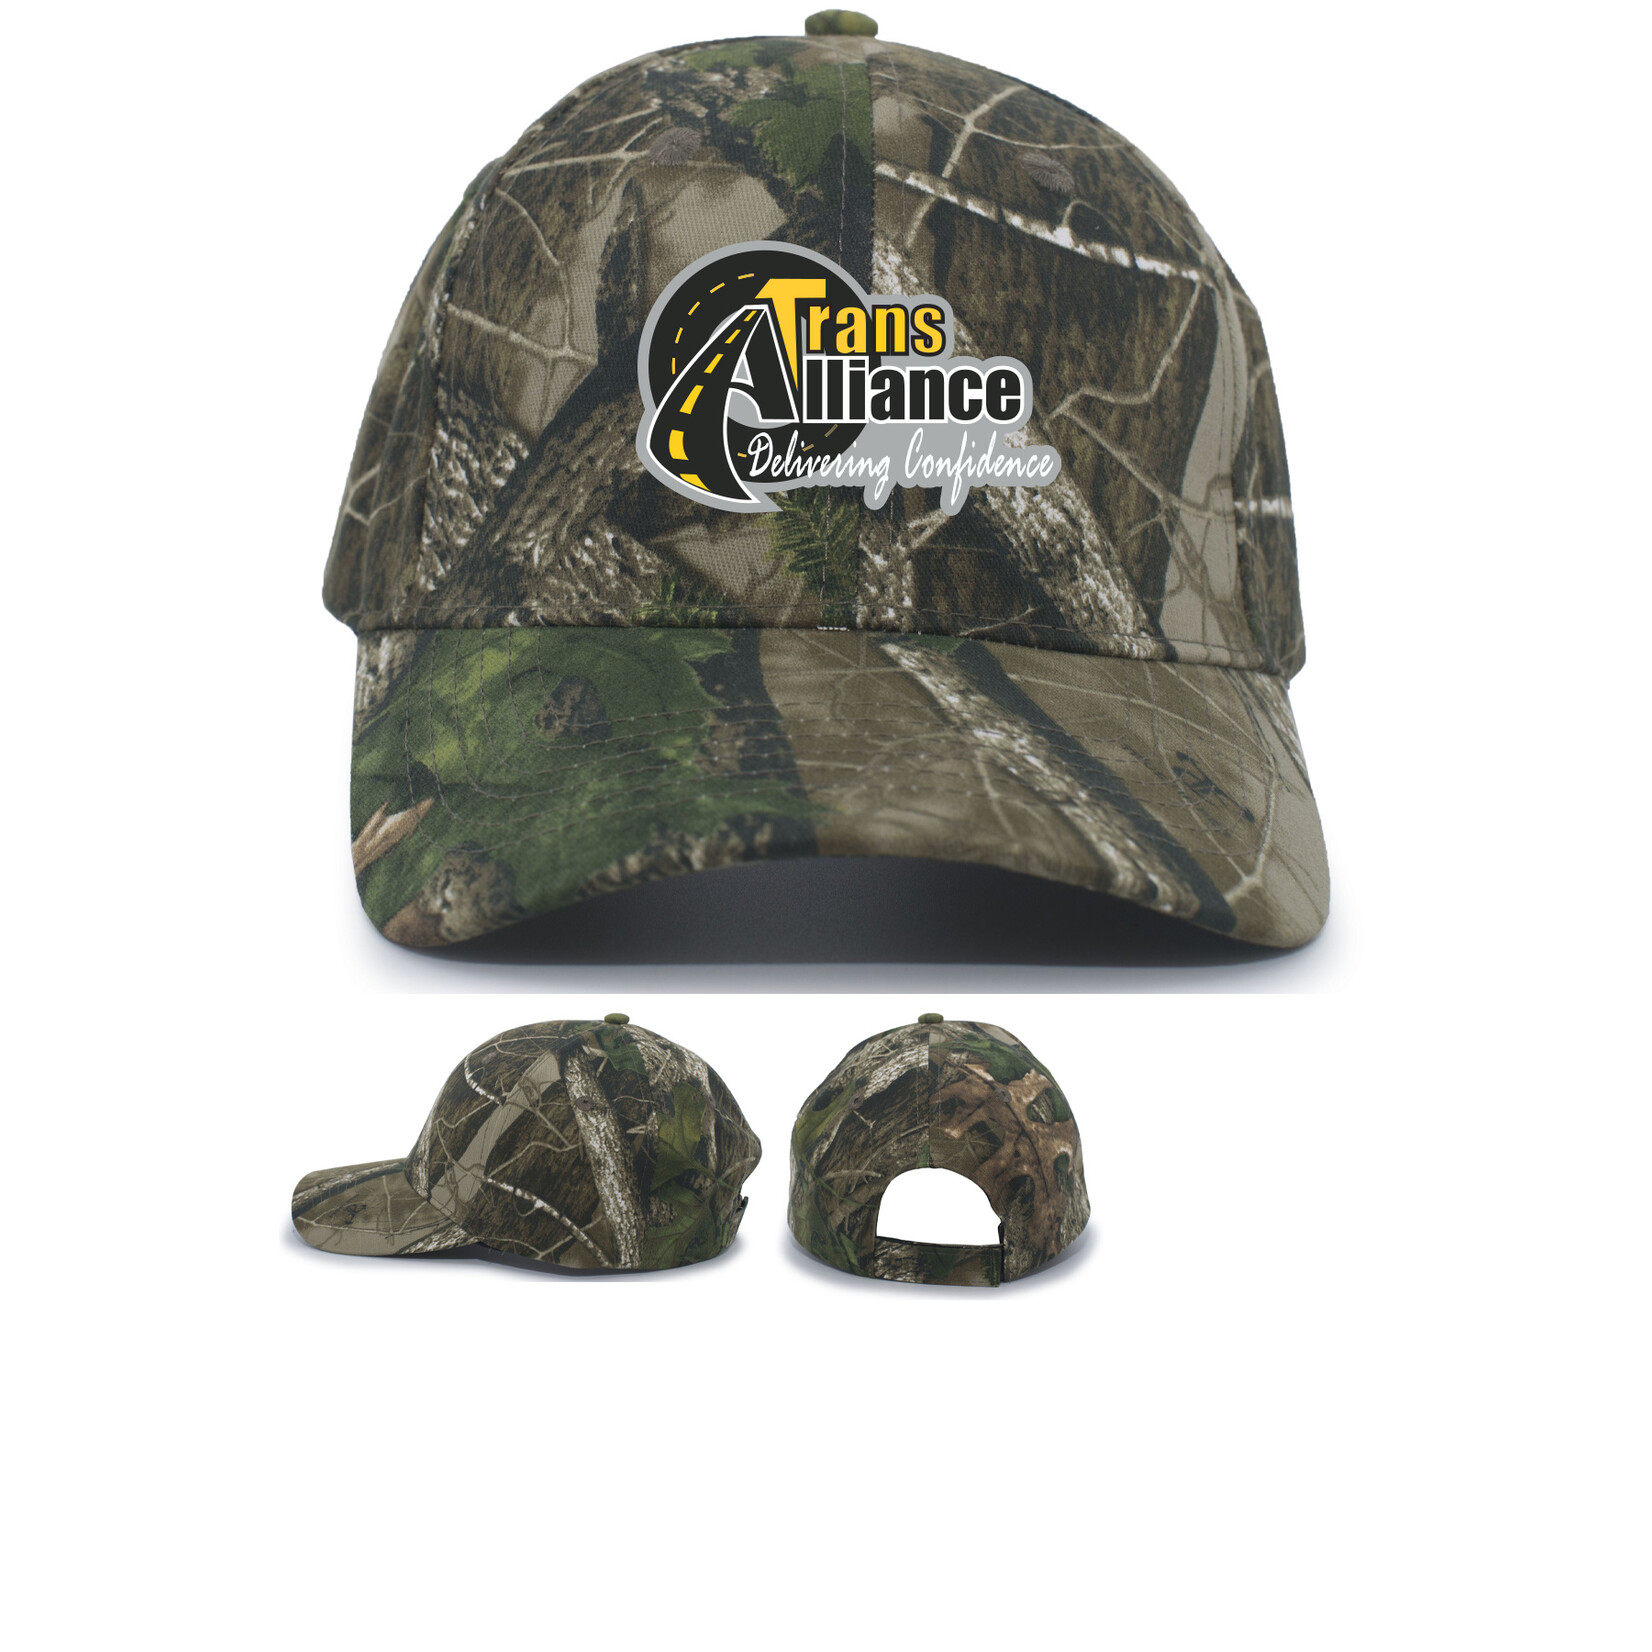 Trans Alliance _ STRUCTURED CAMO HOOK-AND-LOOP ADJUSTABLE CAP 690C